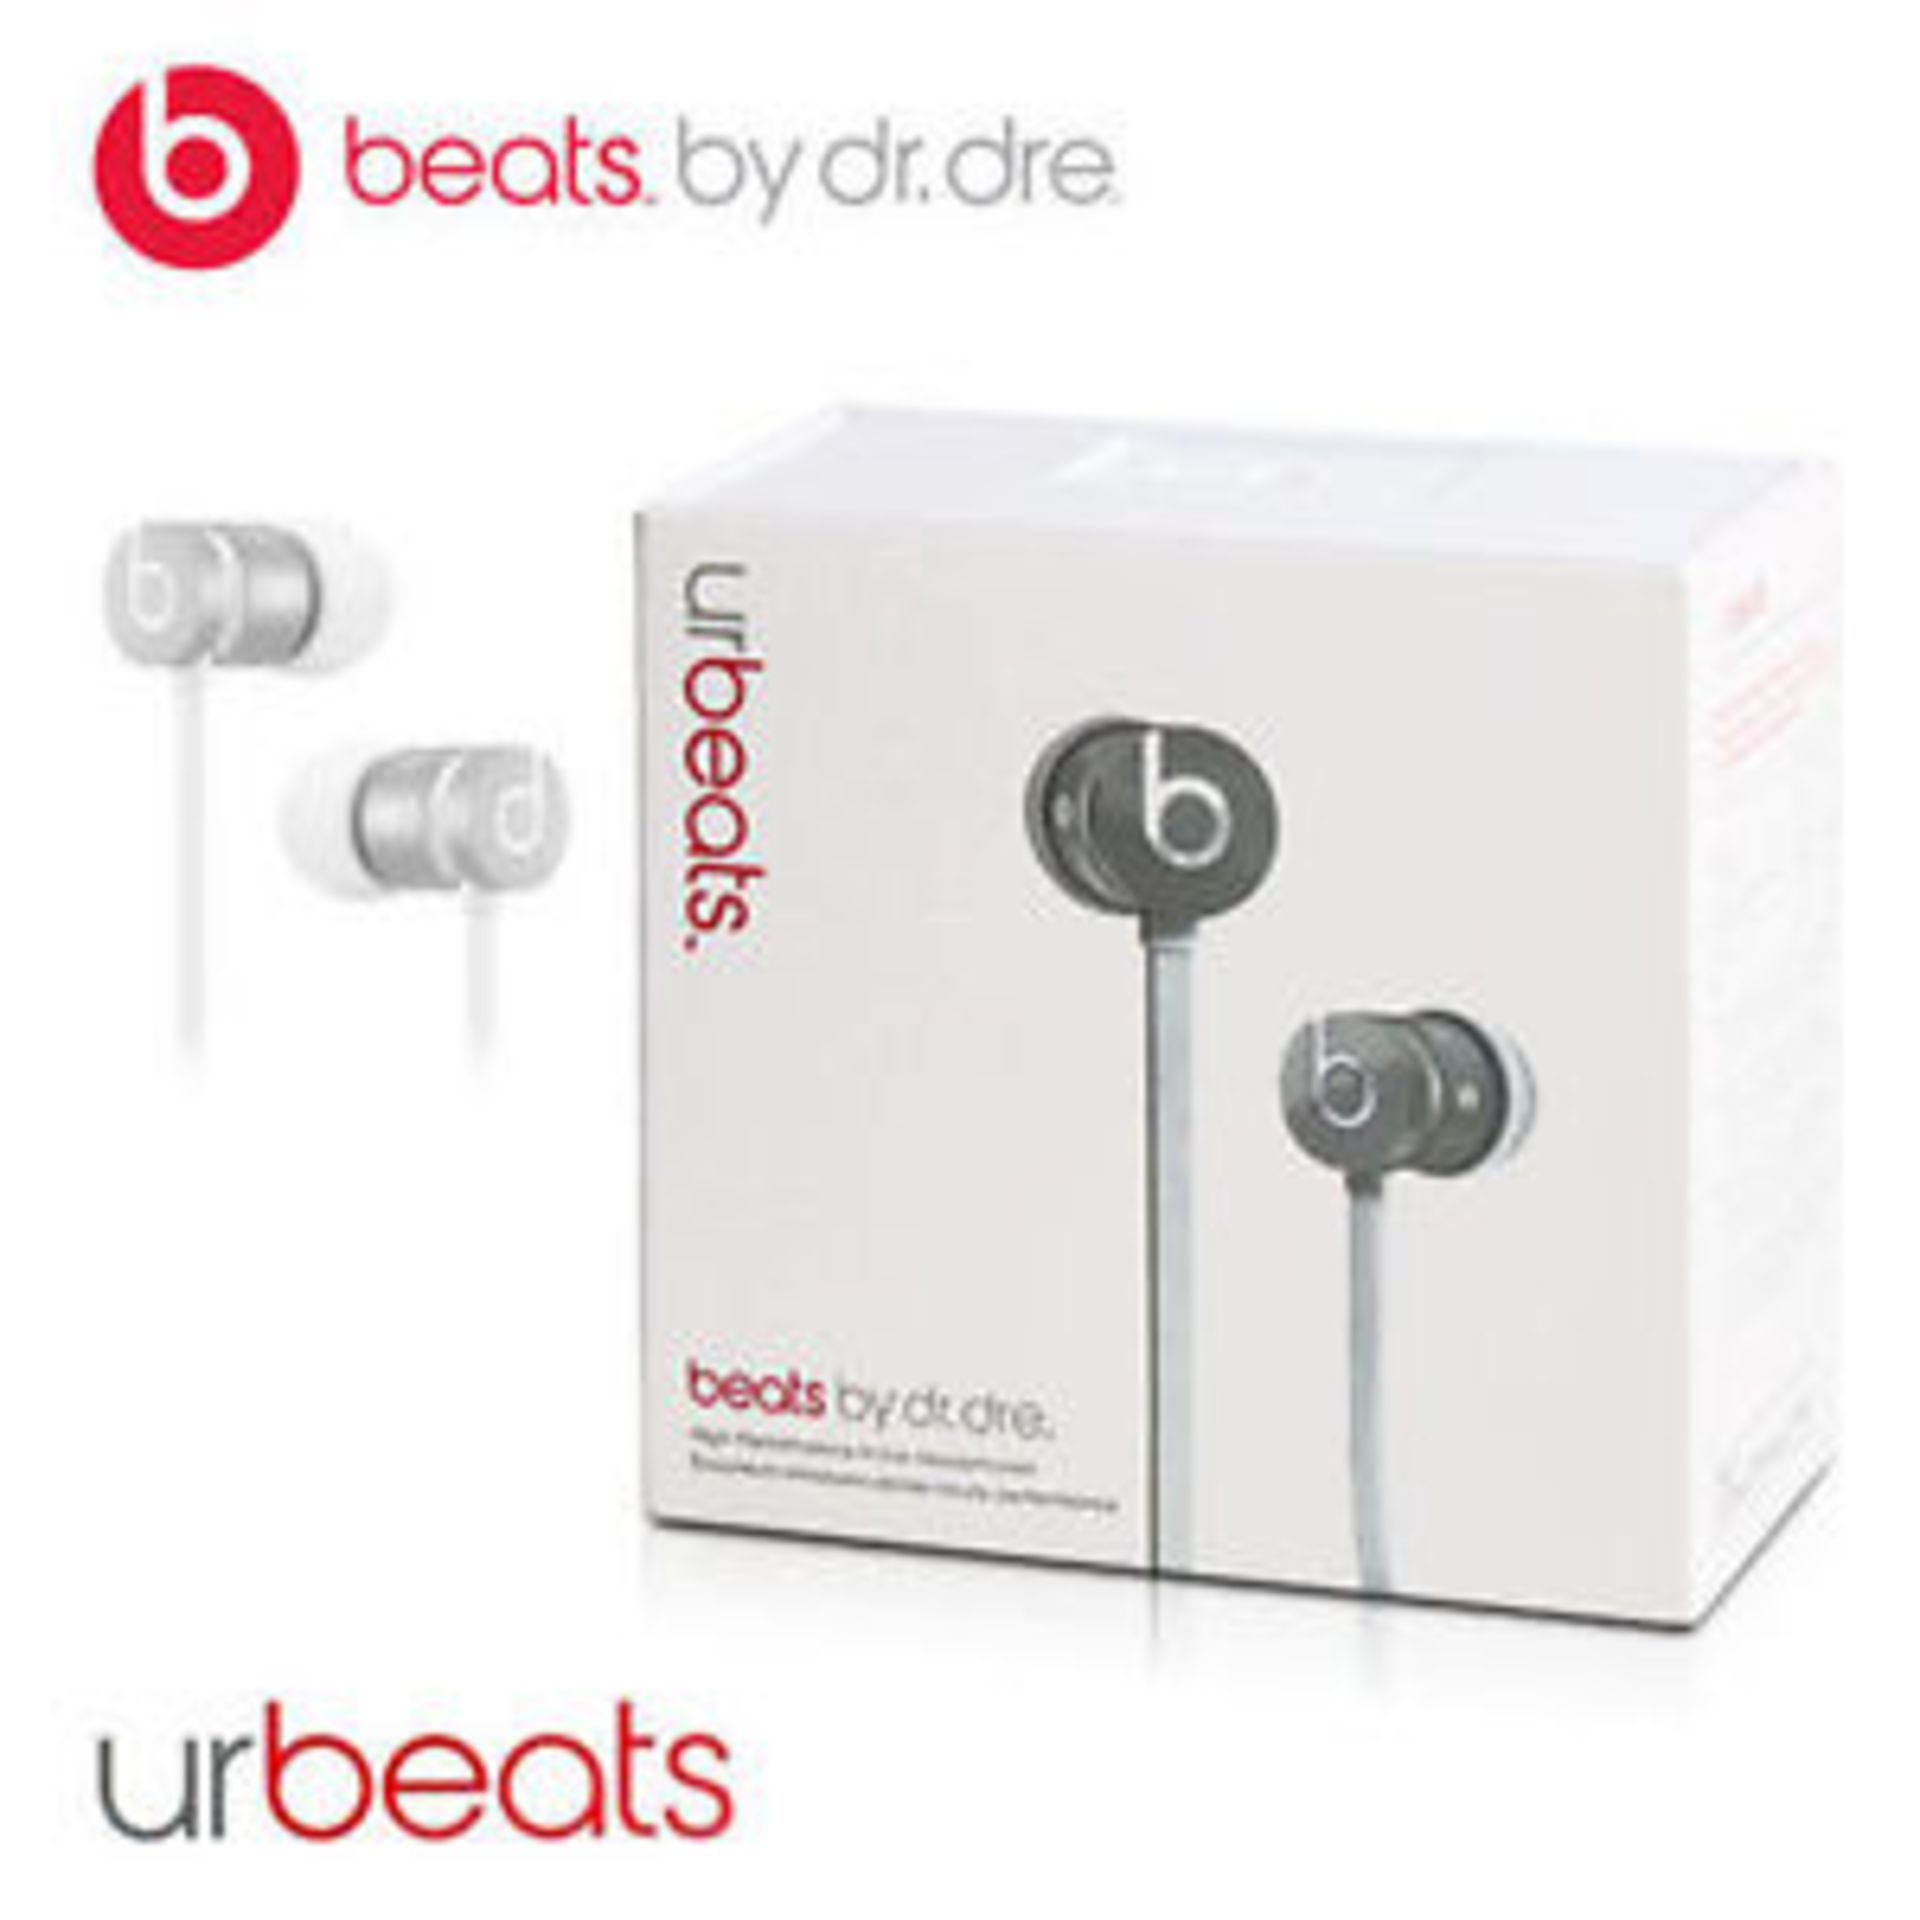 V Brand New Beats By Dr Dre urBeats Earphones - Silver - These are boxed and sealed - With Apple